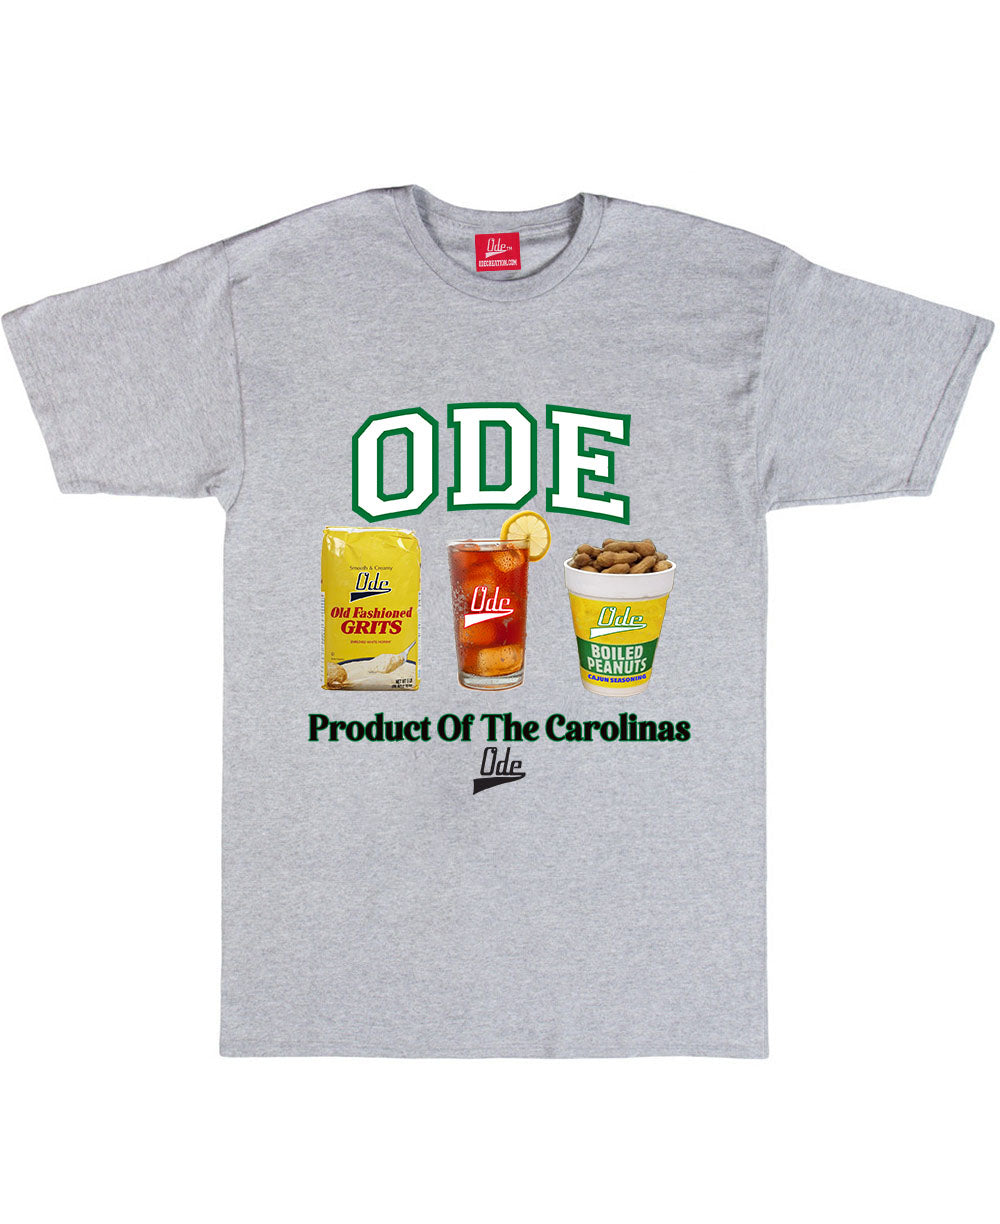 The Ode Product Of The Carolinas T-Shirt/ Grey